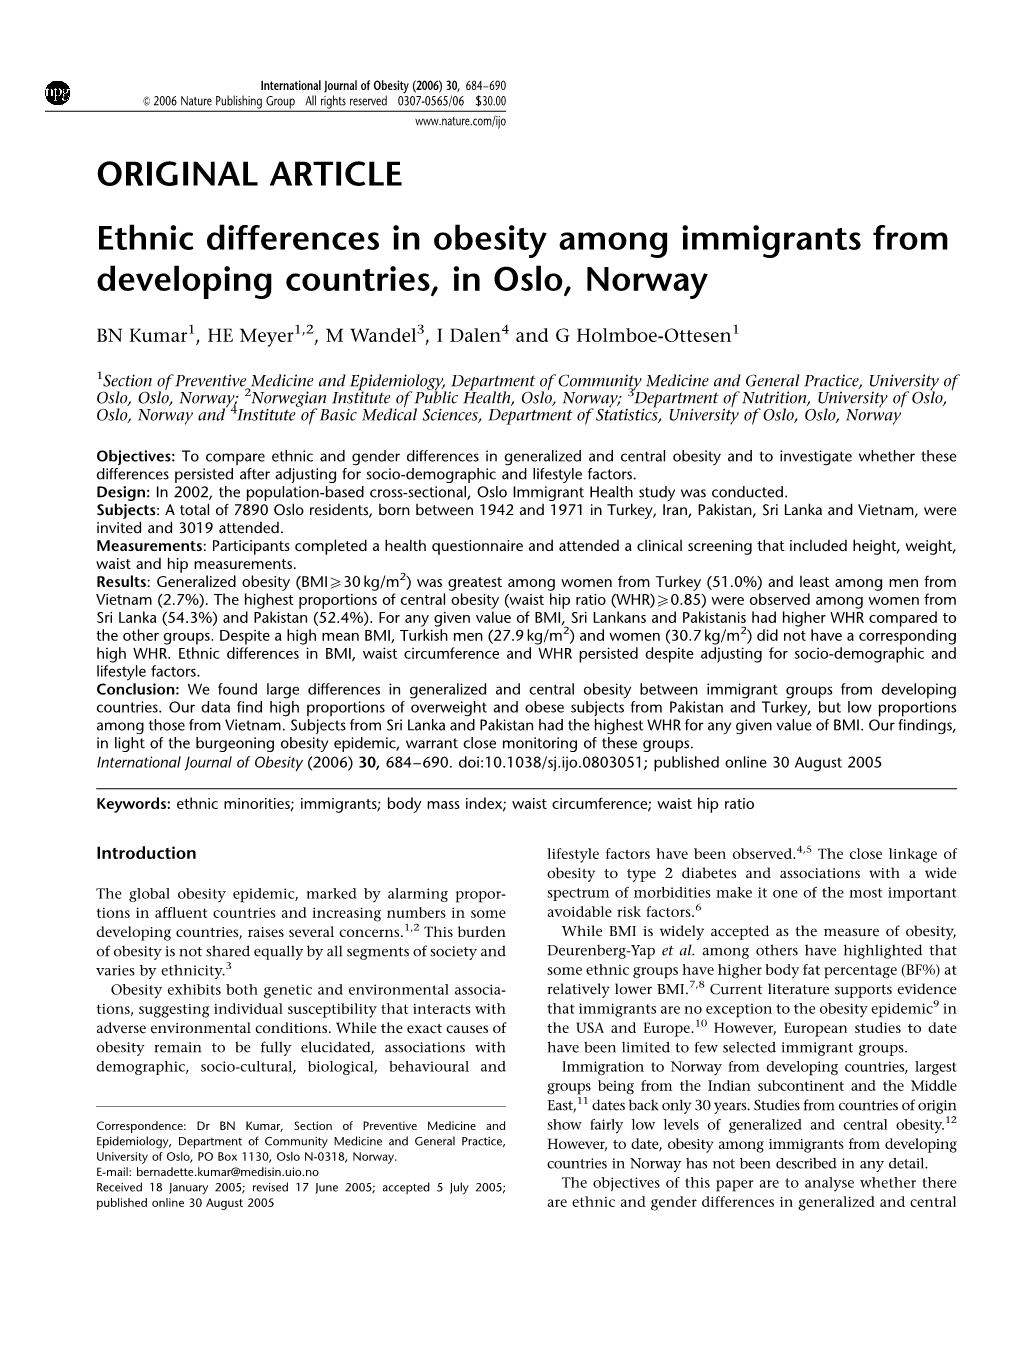 Ethnic Differences in Obesity Among Immigrants from Developing Countries, in Oslo, Norway